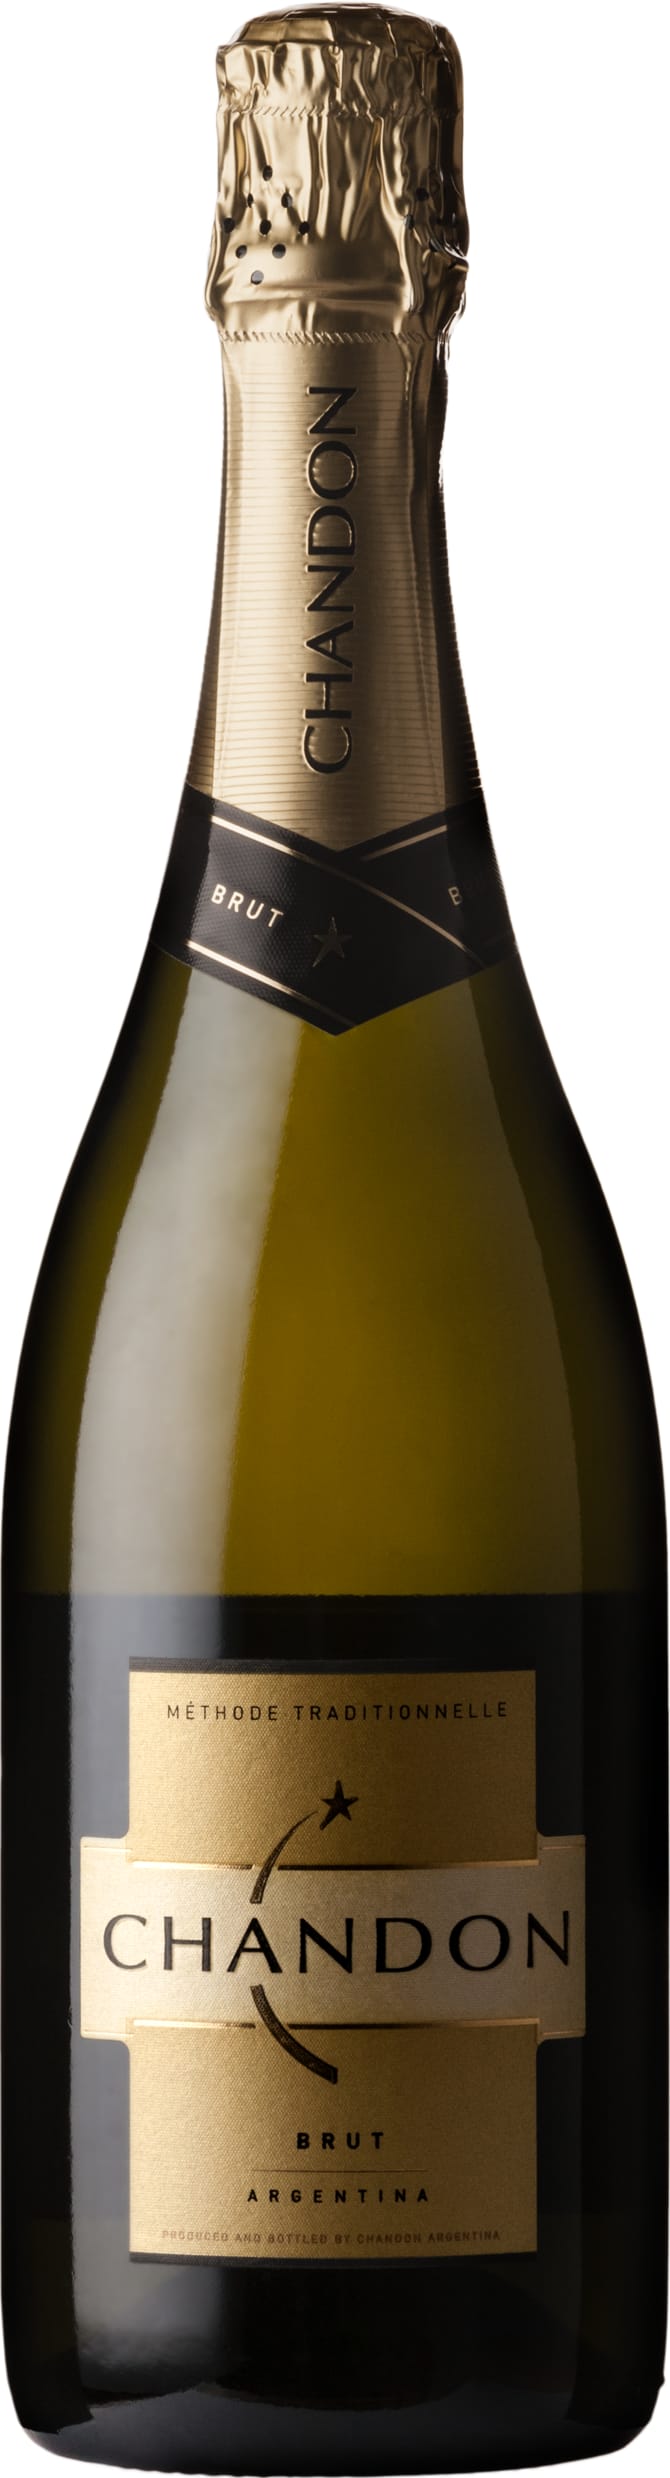 Chandon Chandon Sparkling 75cl NV - Buy Chandon Wines from GREAT WINES DIRECT wine shop